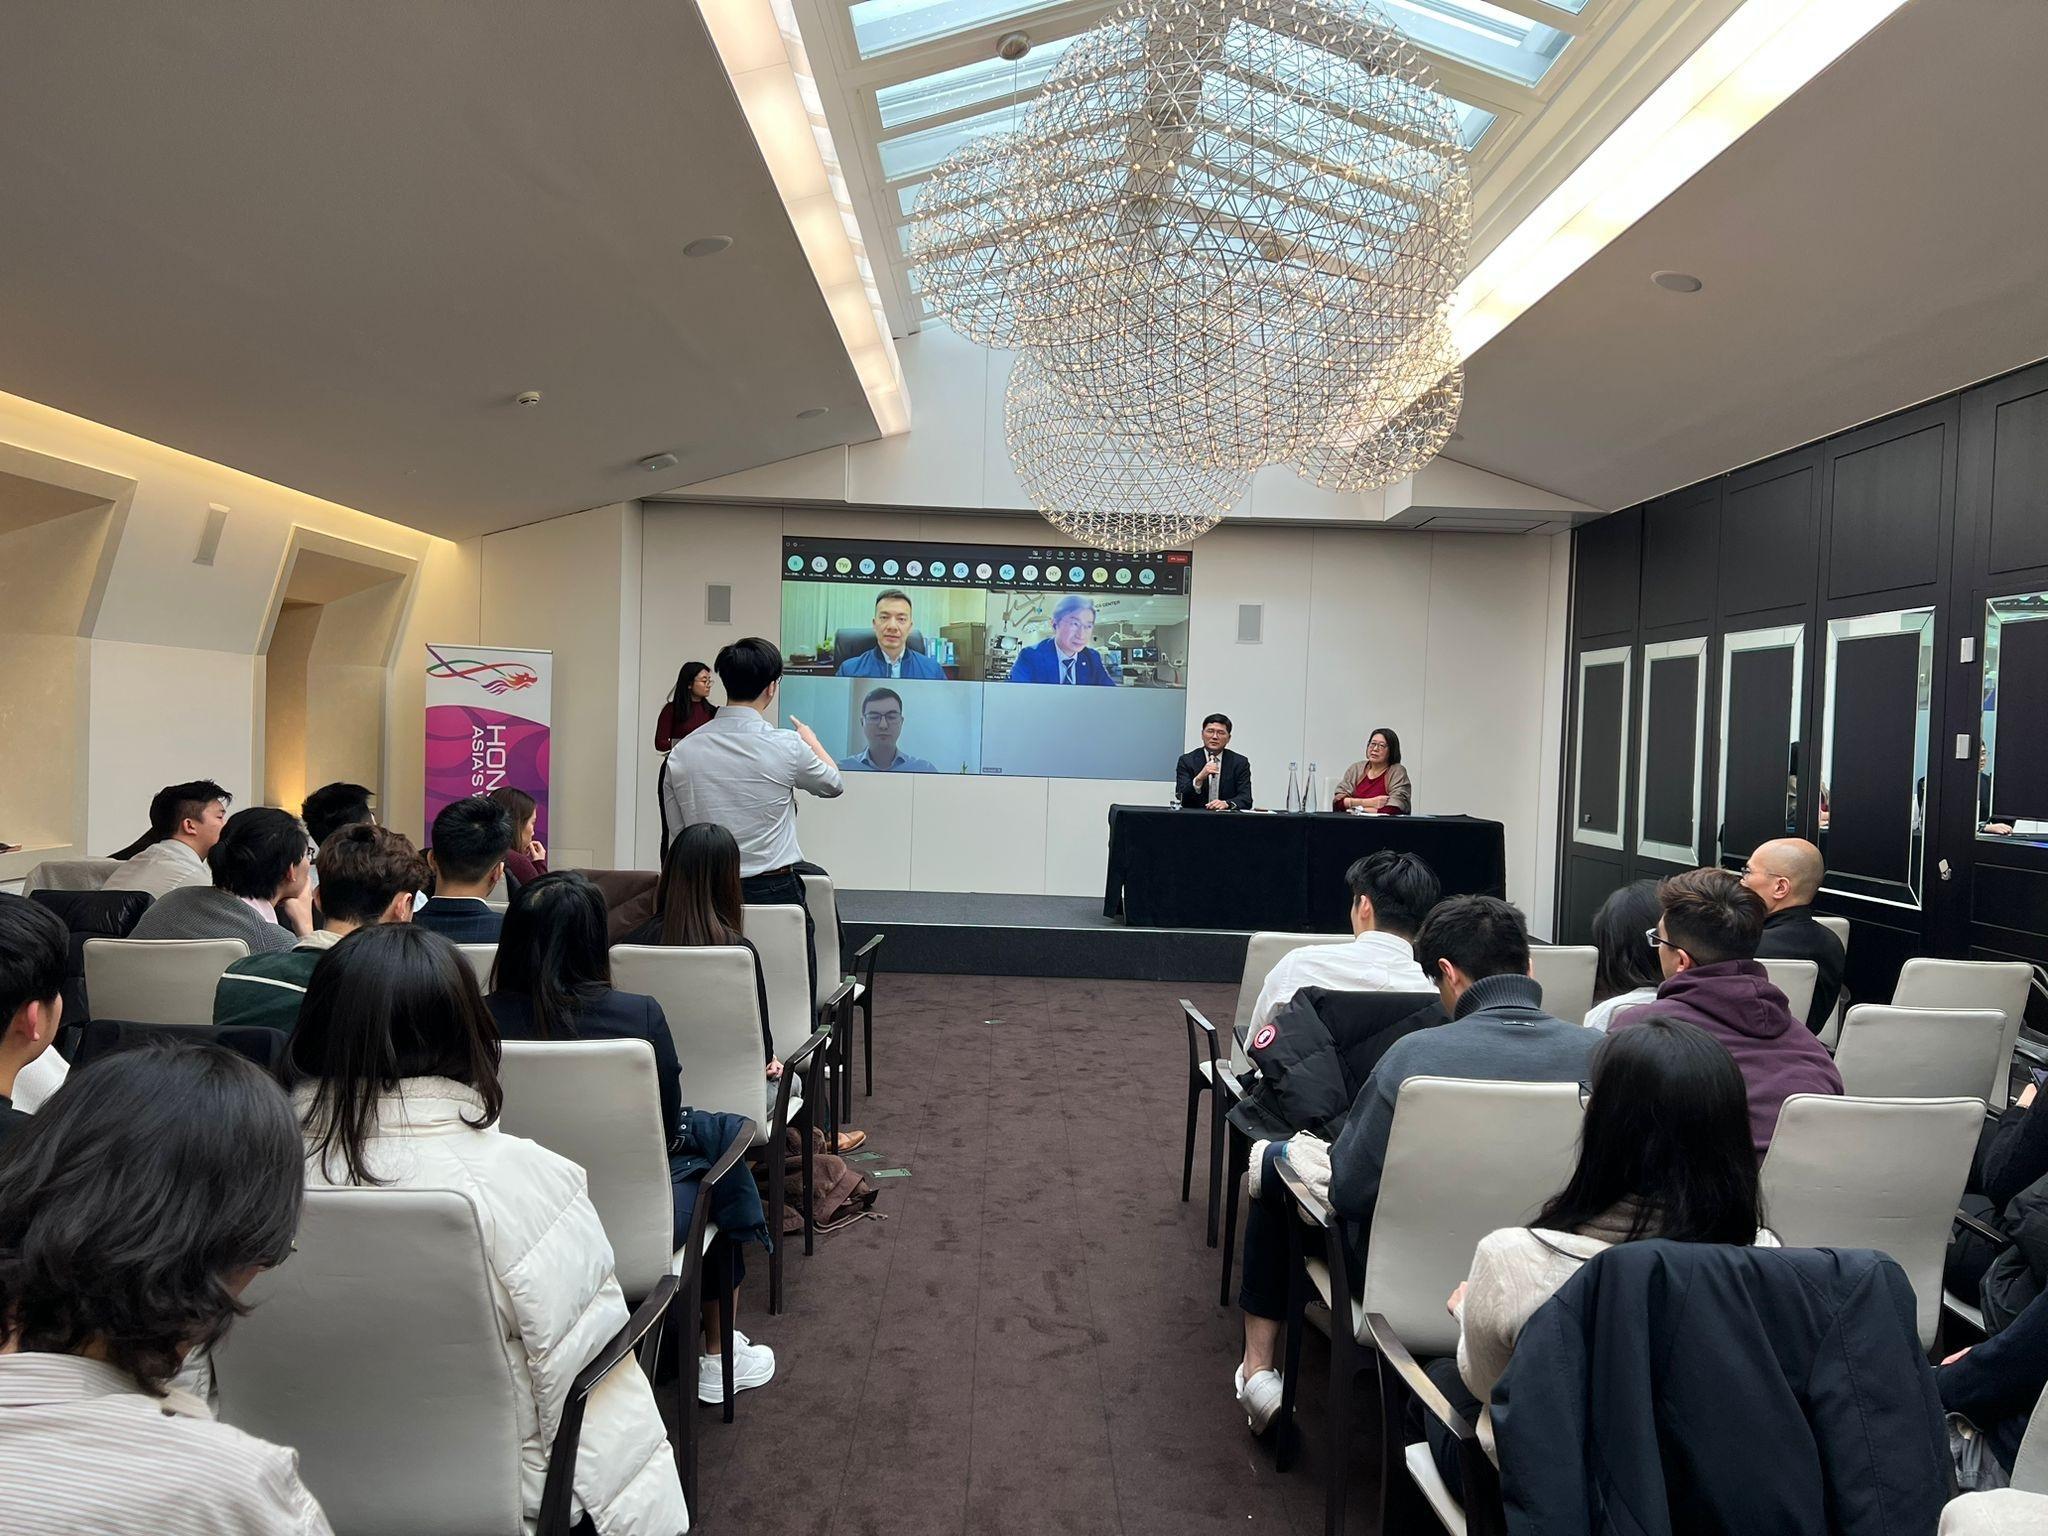 The Hospital Authority Chief Executive, Dr Tony Ko (on stage, second right), met and exchanged with more than 200 medical students and medical practitioners from Hong Kong in person and online in London.